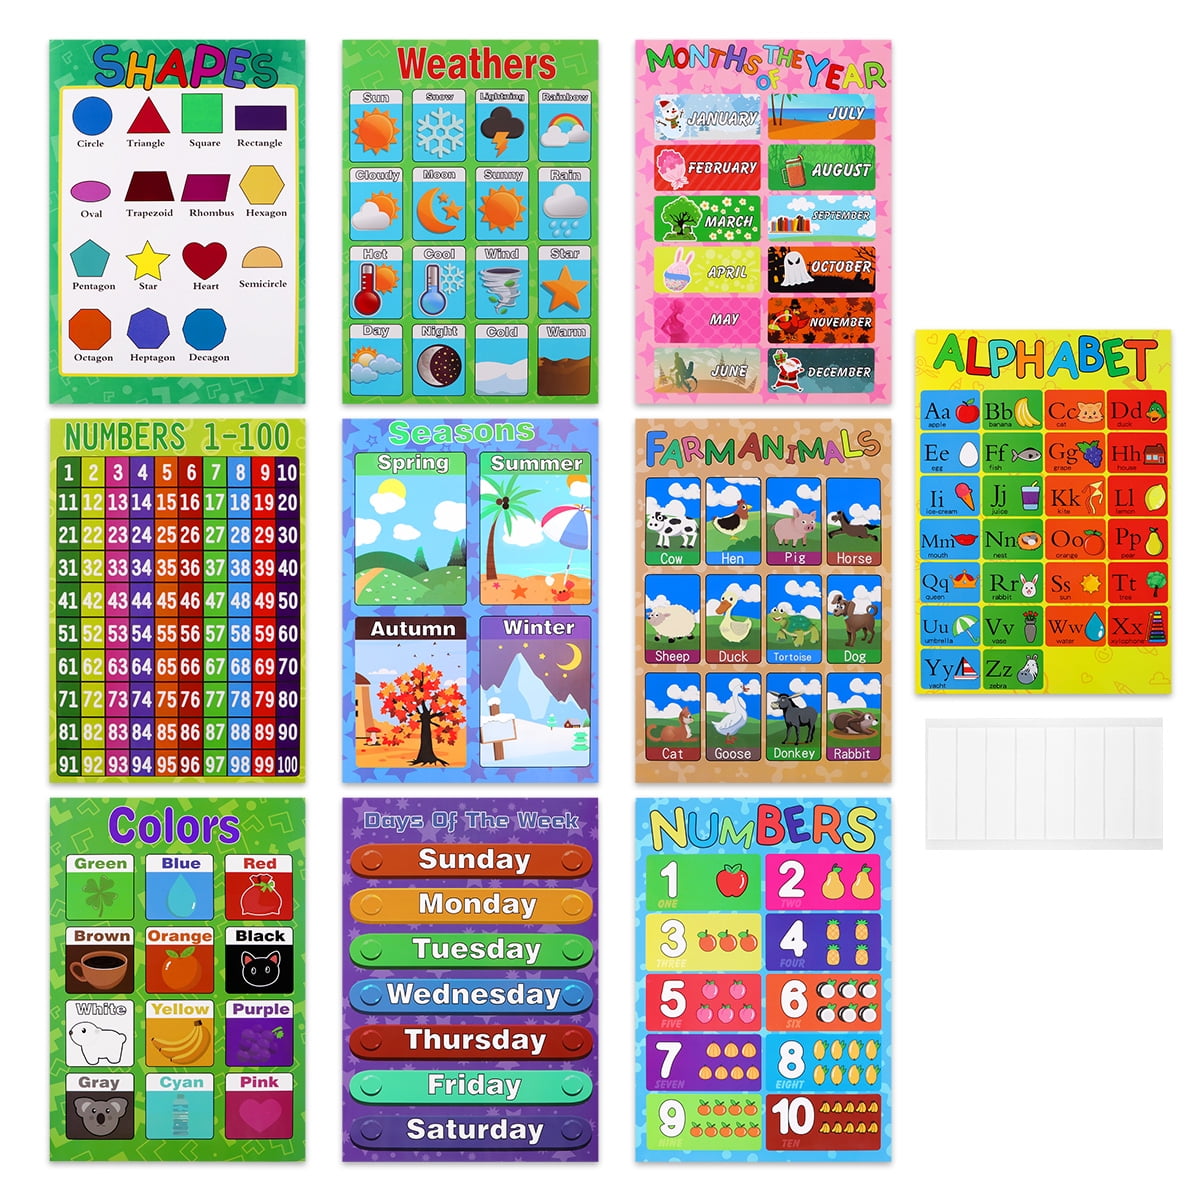 Incl Alphabet Farm Animals and More 10 Pcs Homeschool Teachers Pre-K 16 x 11 Inch Colors Kindergarten Numbers Classroom Shapes Daycares Educational Preschool Learning Poster for Toddler 